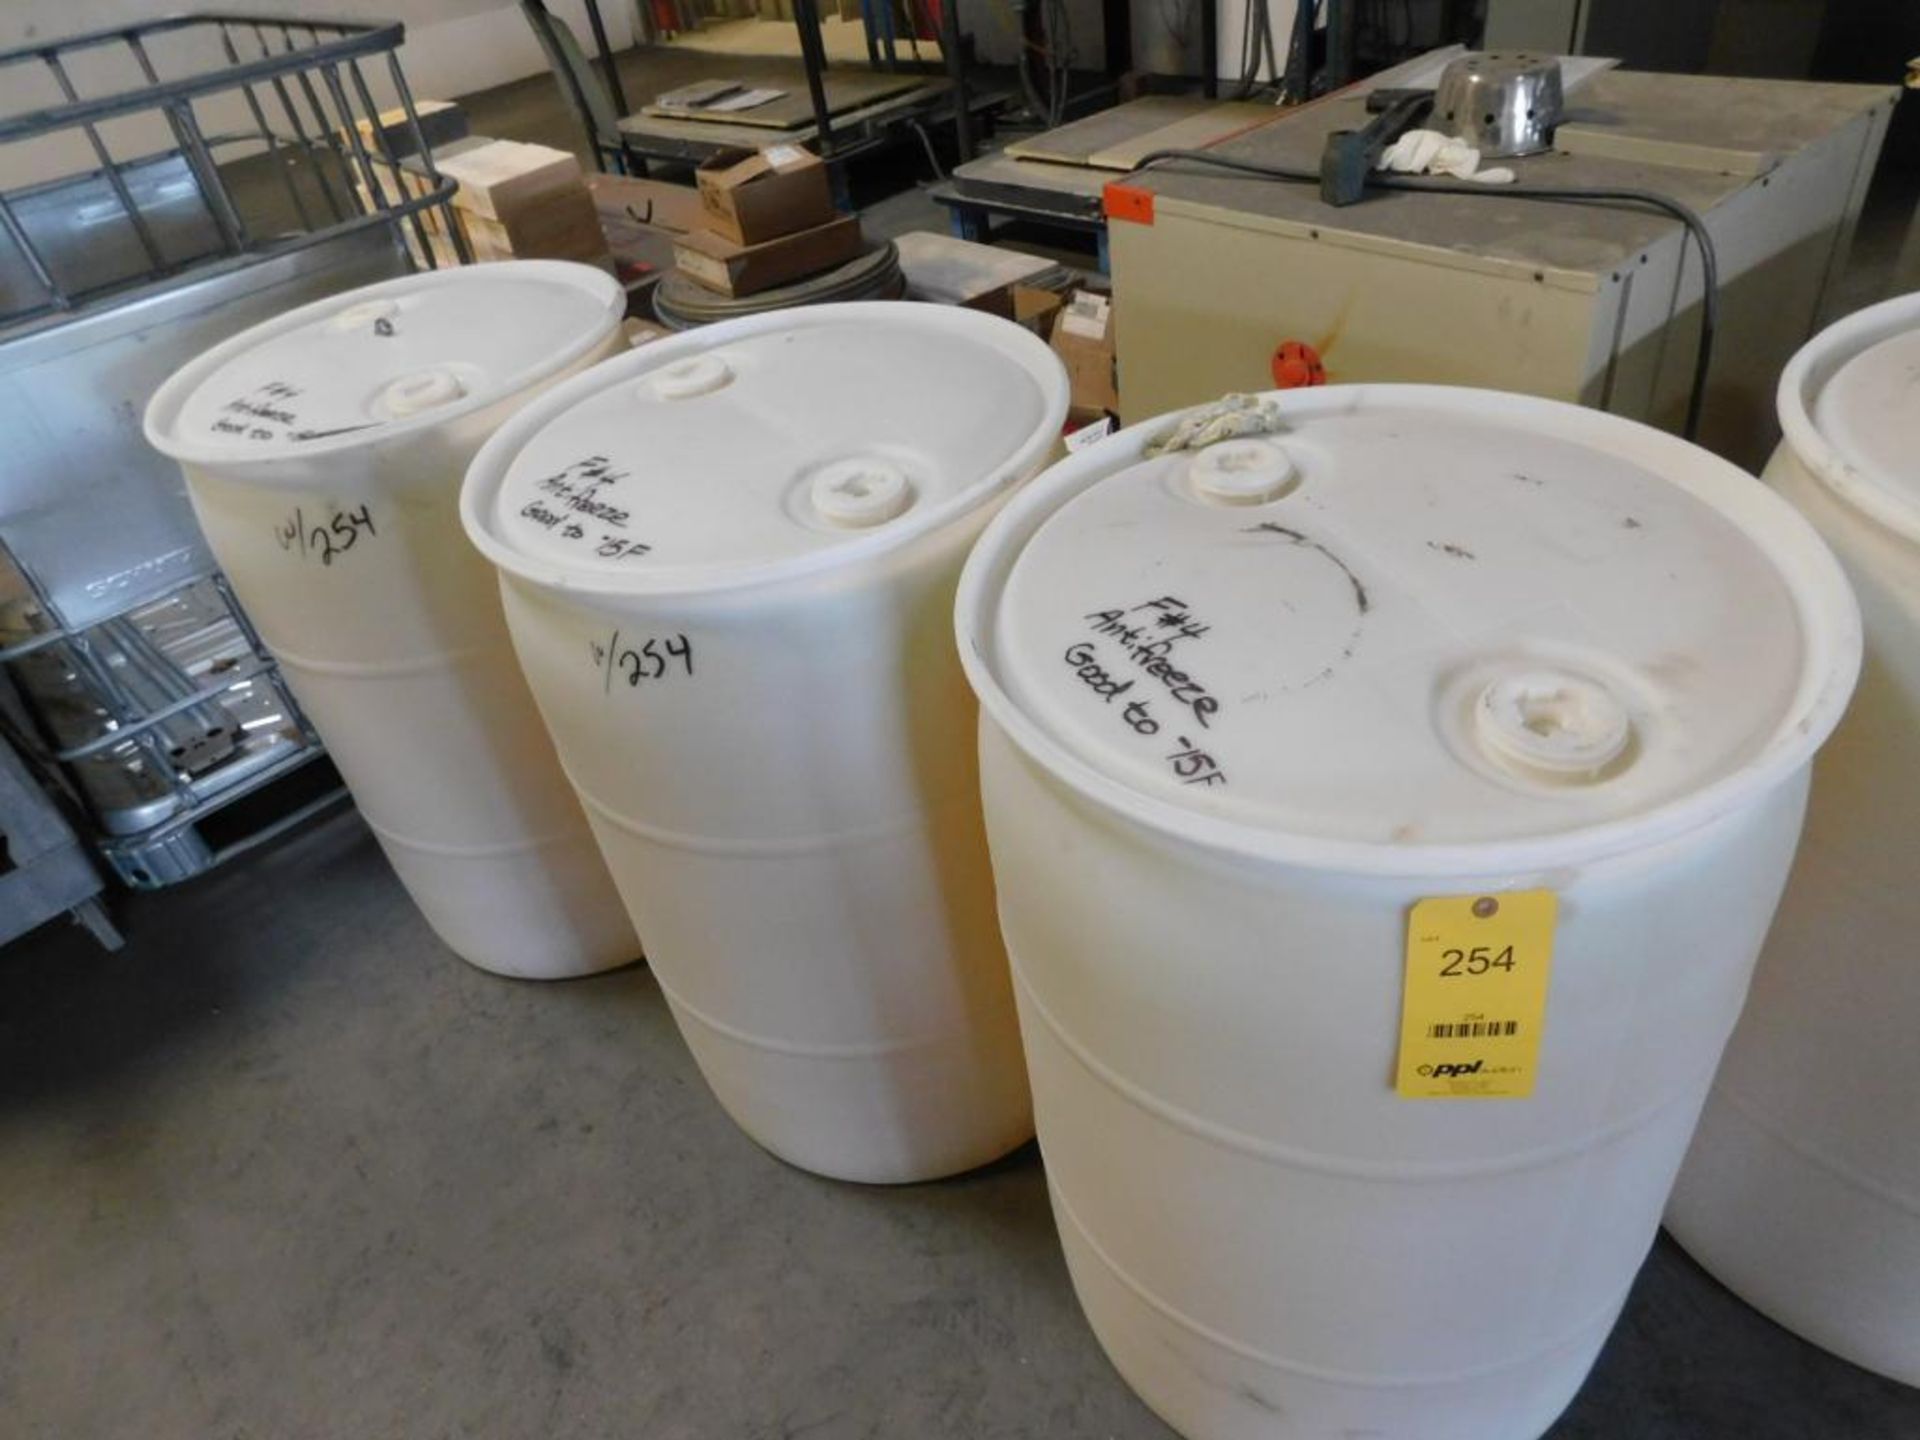 LOT: (3) 55 Gallon Barrels Anti-Freeze for Furnaces - protects to -15 Degrees F